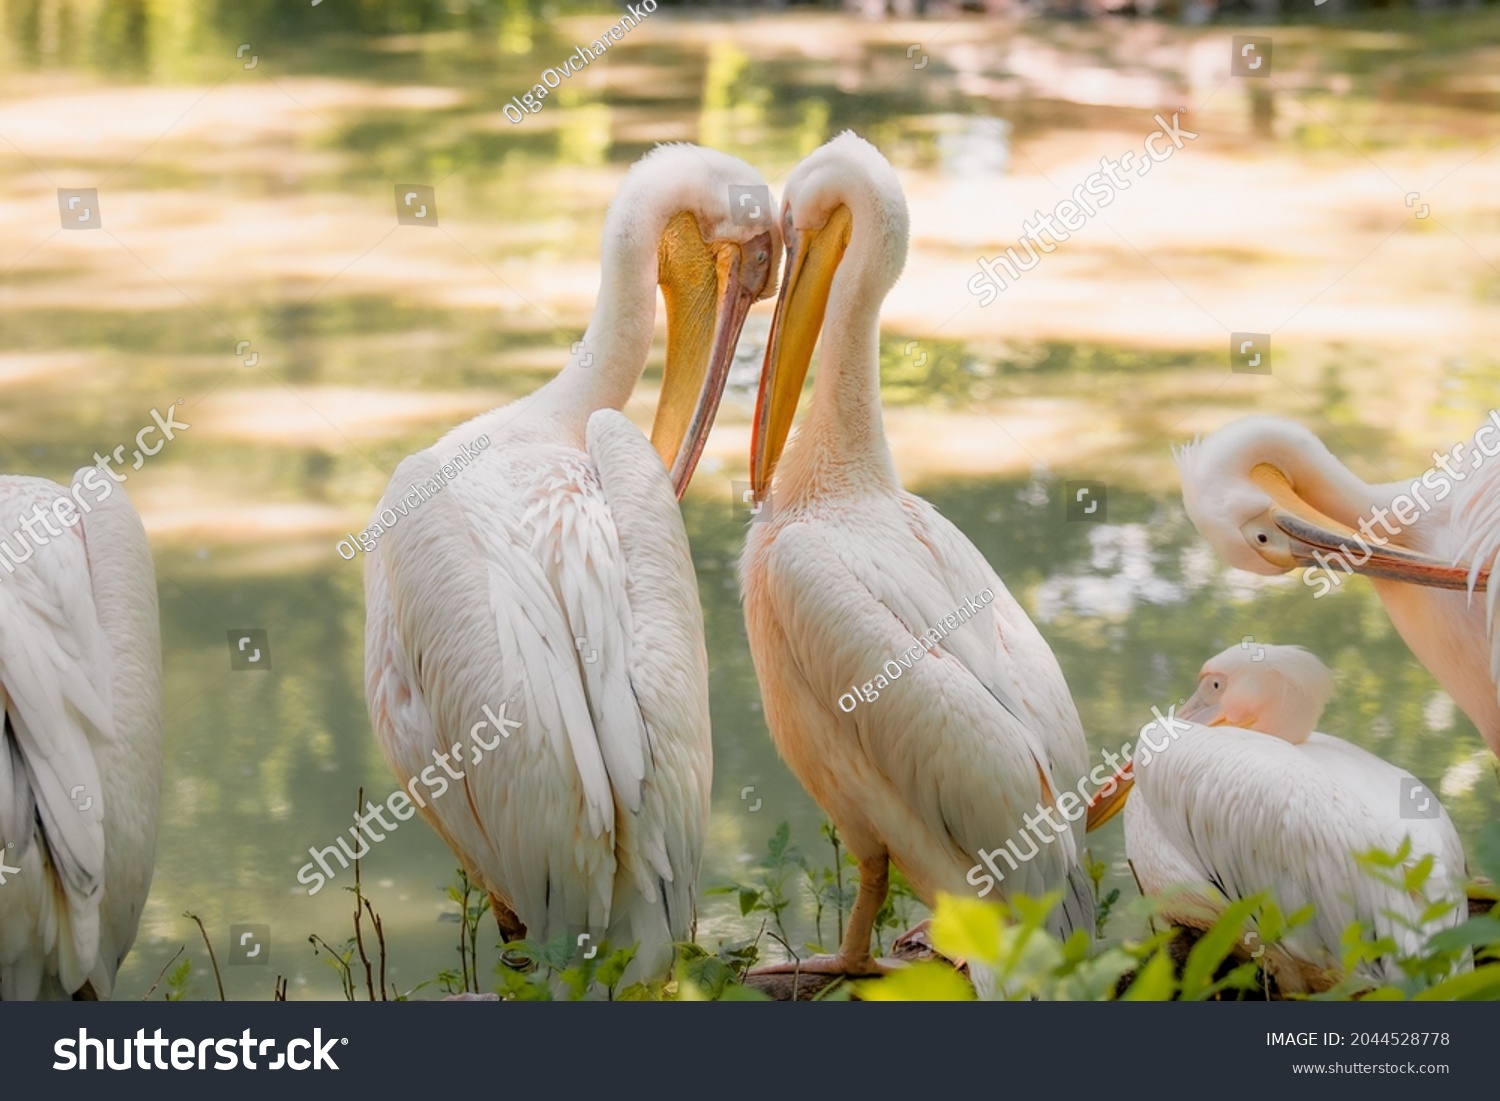 The great white pelican (Pelecanus onocrotalus) aka the eastern white pelican, rosy pelican or white pelican. Wild birds in nature. The inhabitants of the zoo. Birdwatching. #2044528778